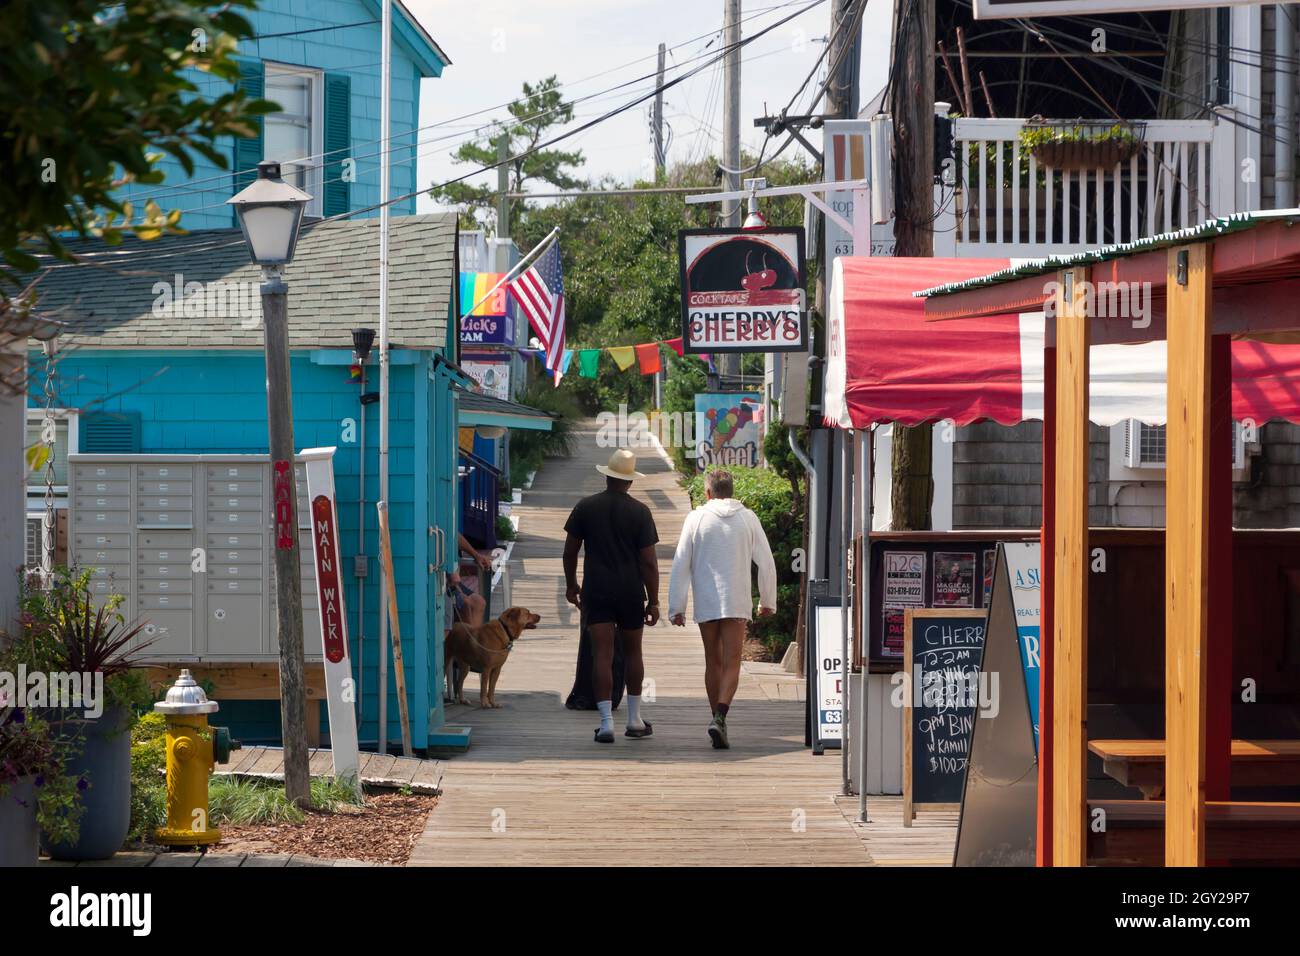 Gay couple walking along the boardwalk through the central business district (Town) of Cherry Grove on Fire Island, New York, Suffolk County, USA. Stock Photo